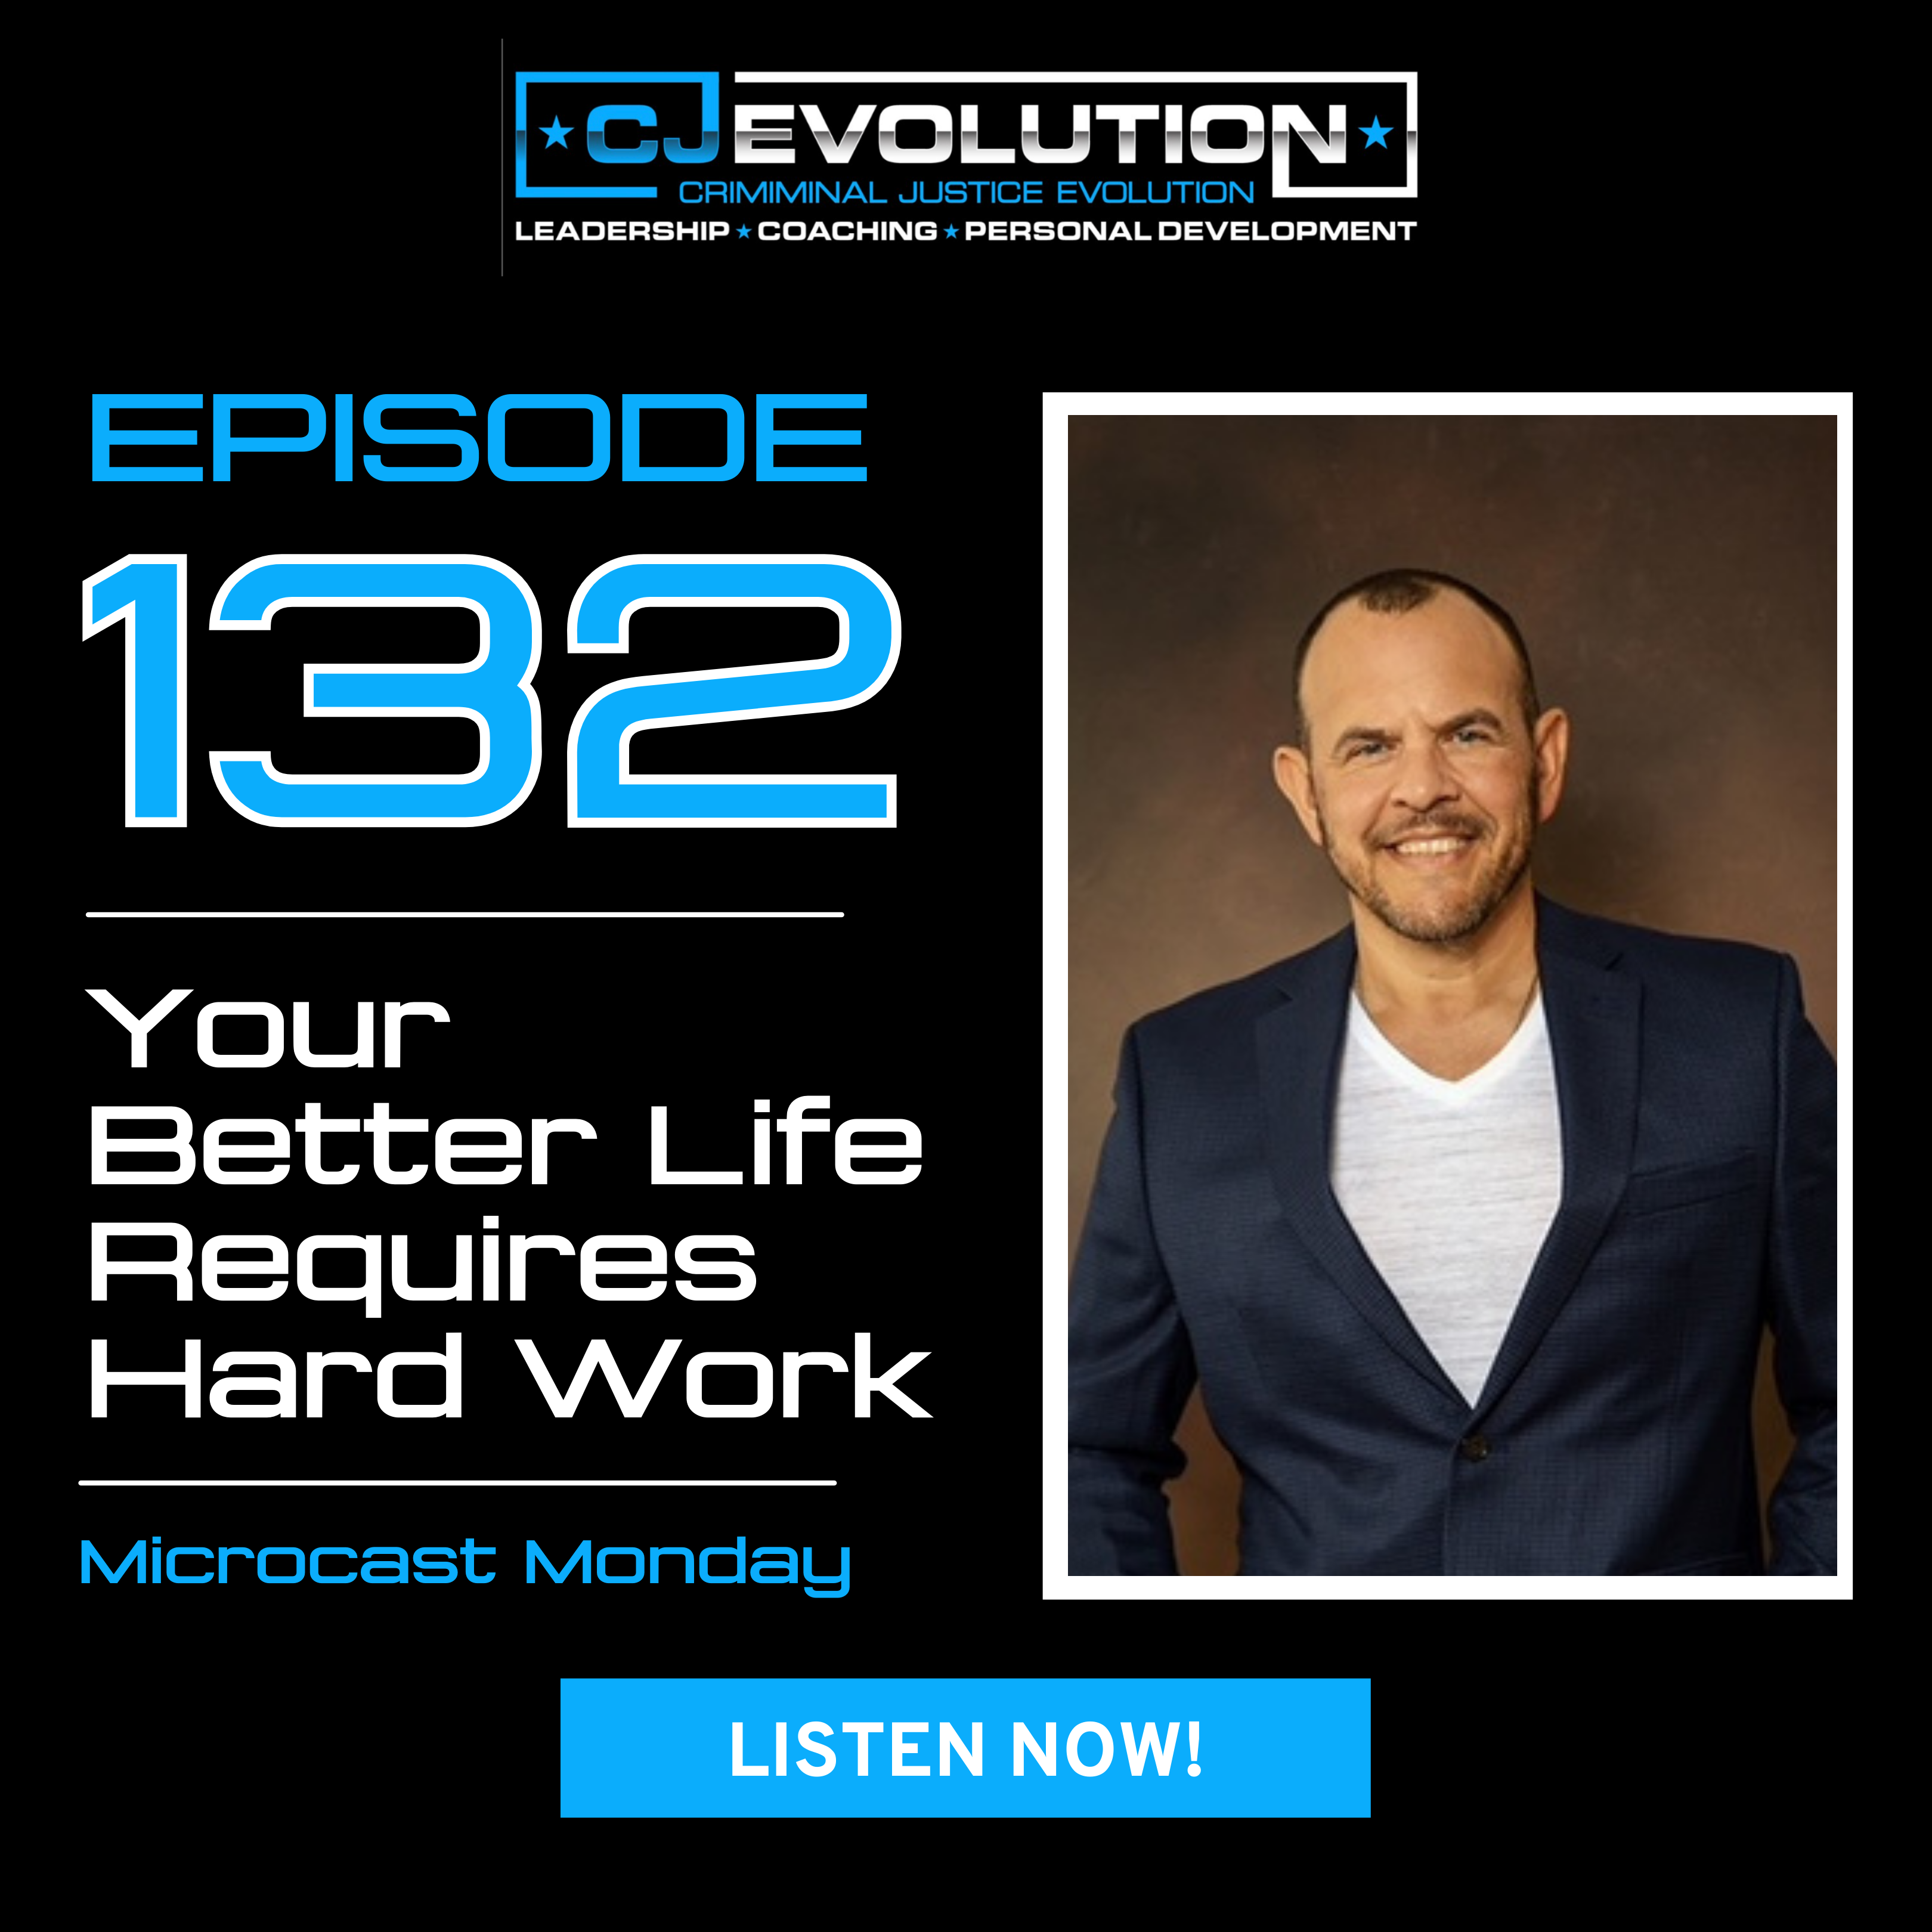 Microcast Monday #132 – Your Better Life Requires Hard Work